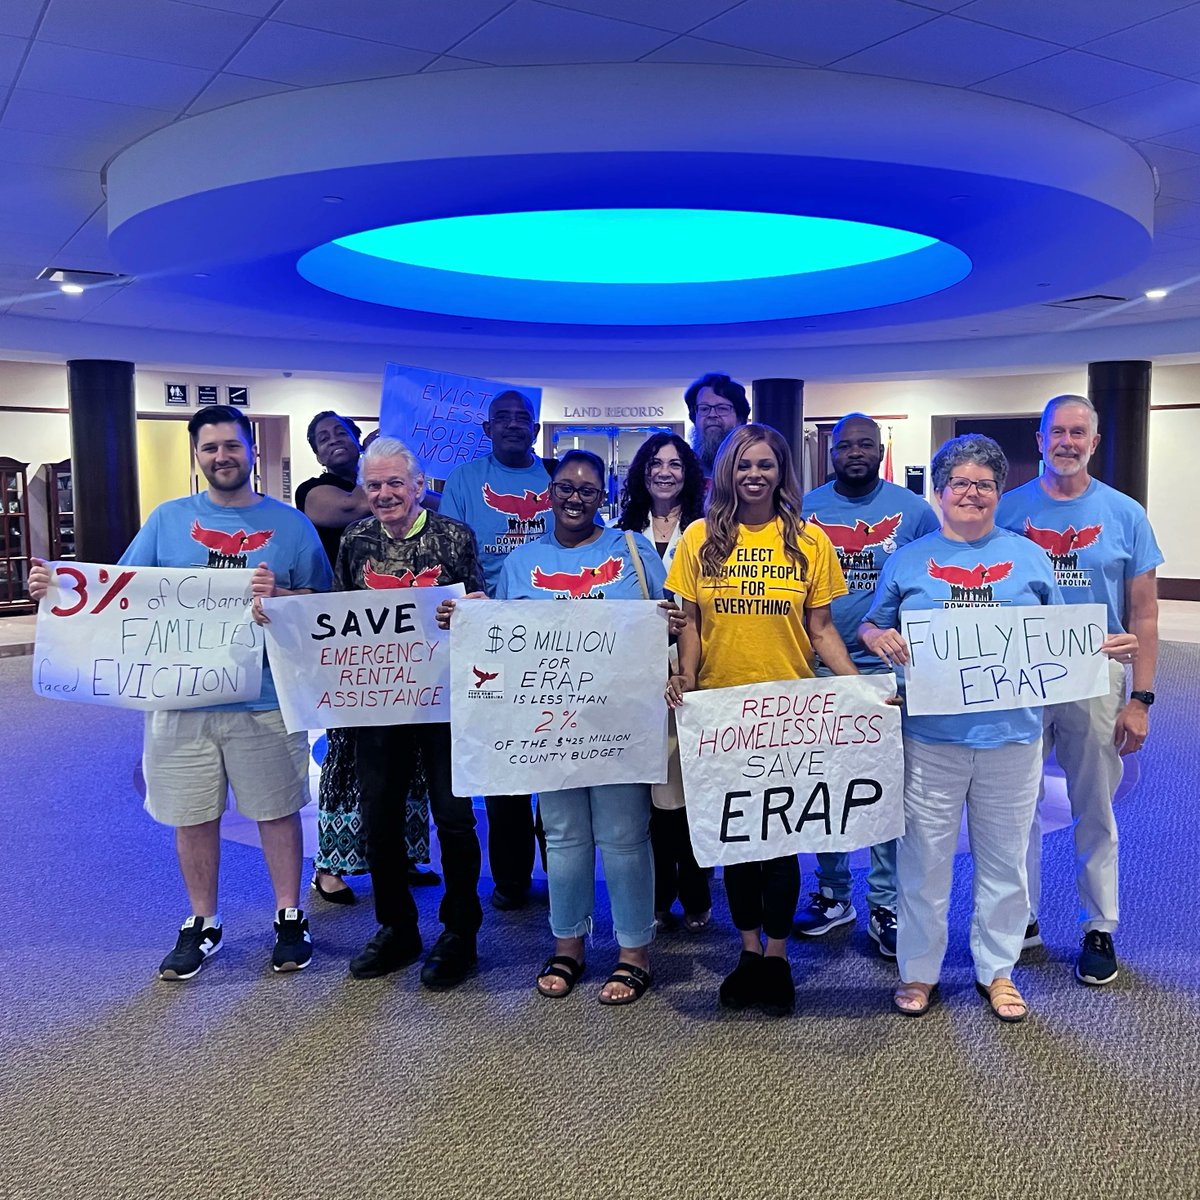 Did you know 64% of Americans live paycheck to paycheck? That means so many families are one step away from missing their rental payment. That's why our Cabarrus chapter is campaigning to fund an Emergency Rental Assistance Program (ERAP). Want to get involved? Check out our bio!